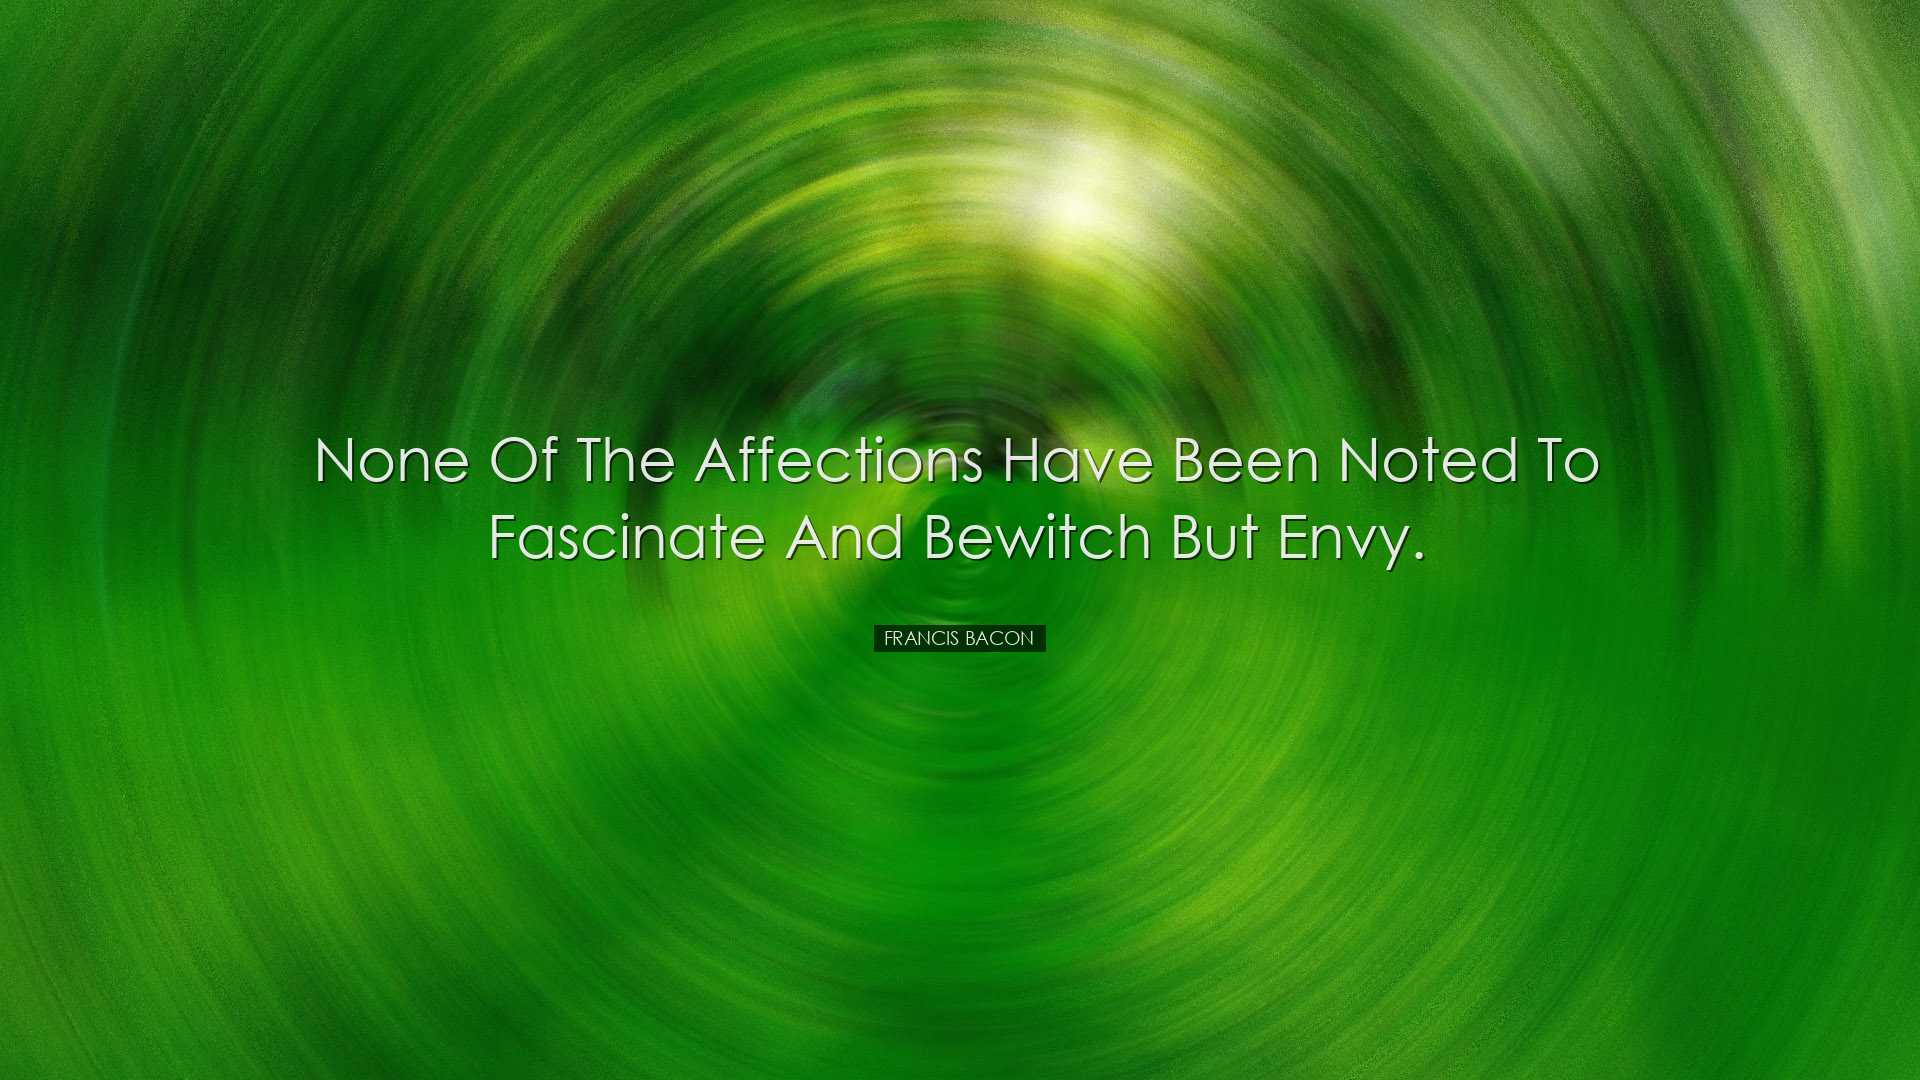 None of the affections have been noted to fascinate and bewitch bu